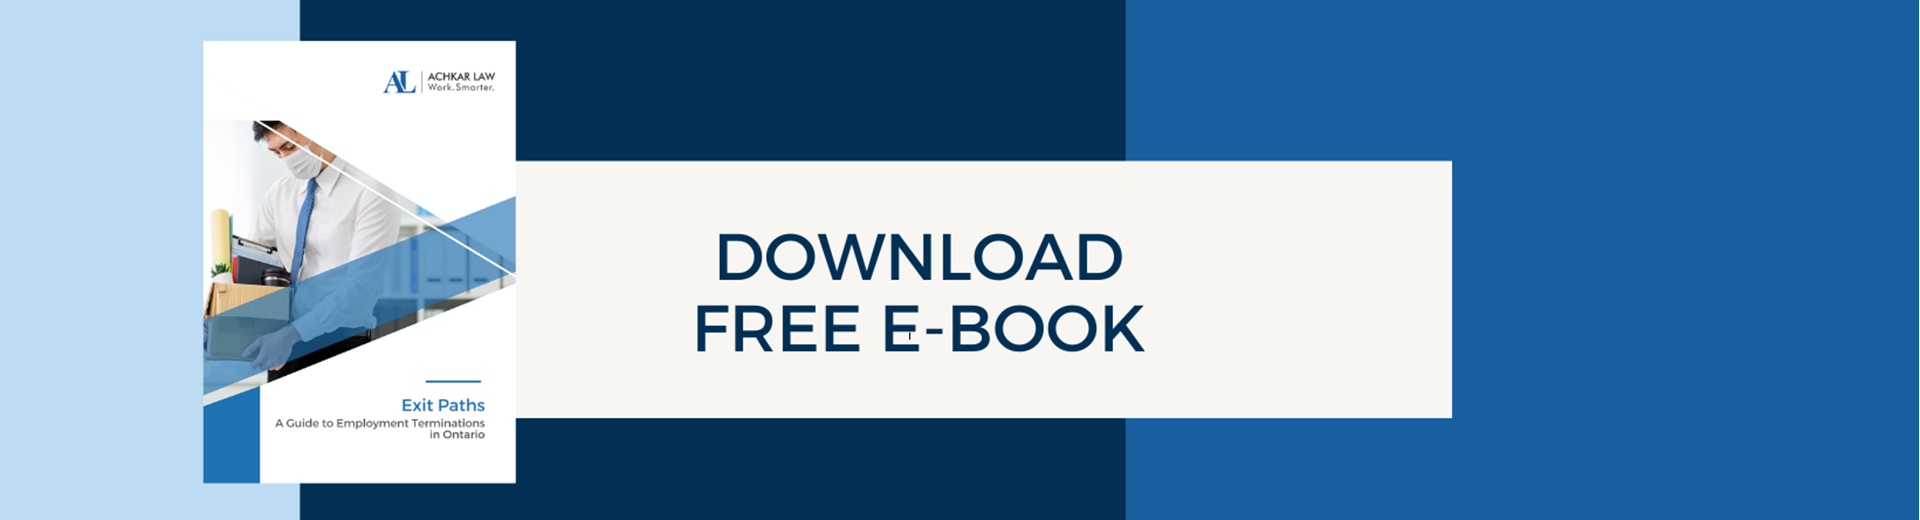 download free eBook - Exit Paths A Guice to Employment Terminations in Ontario